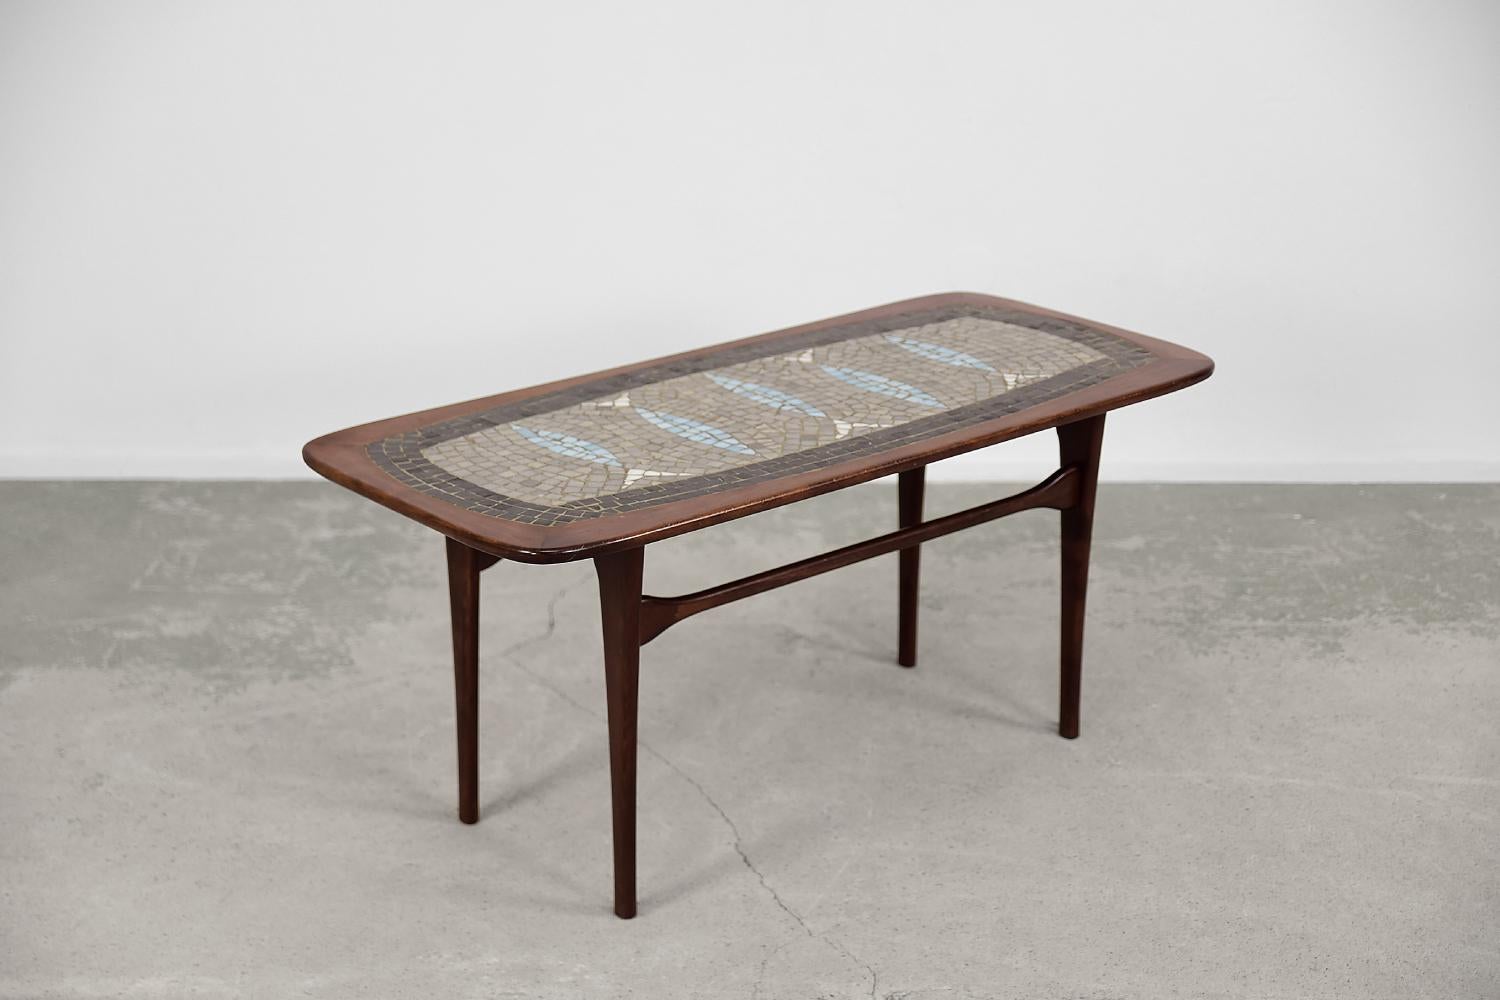 This coffee table was designed by Edvard Johansson for the Swedish manufacture Edvard Johansson Möbelfabrik during the 1960s. The table made of dark-colored beech wood. The tabletop is decorated with an inlaid mosaic of fish. Ceramic tesserae are